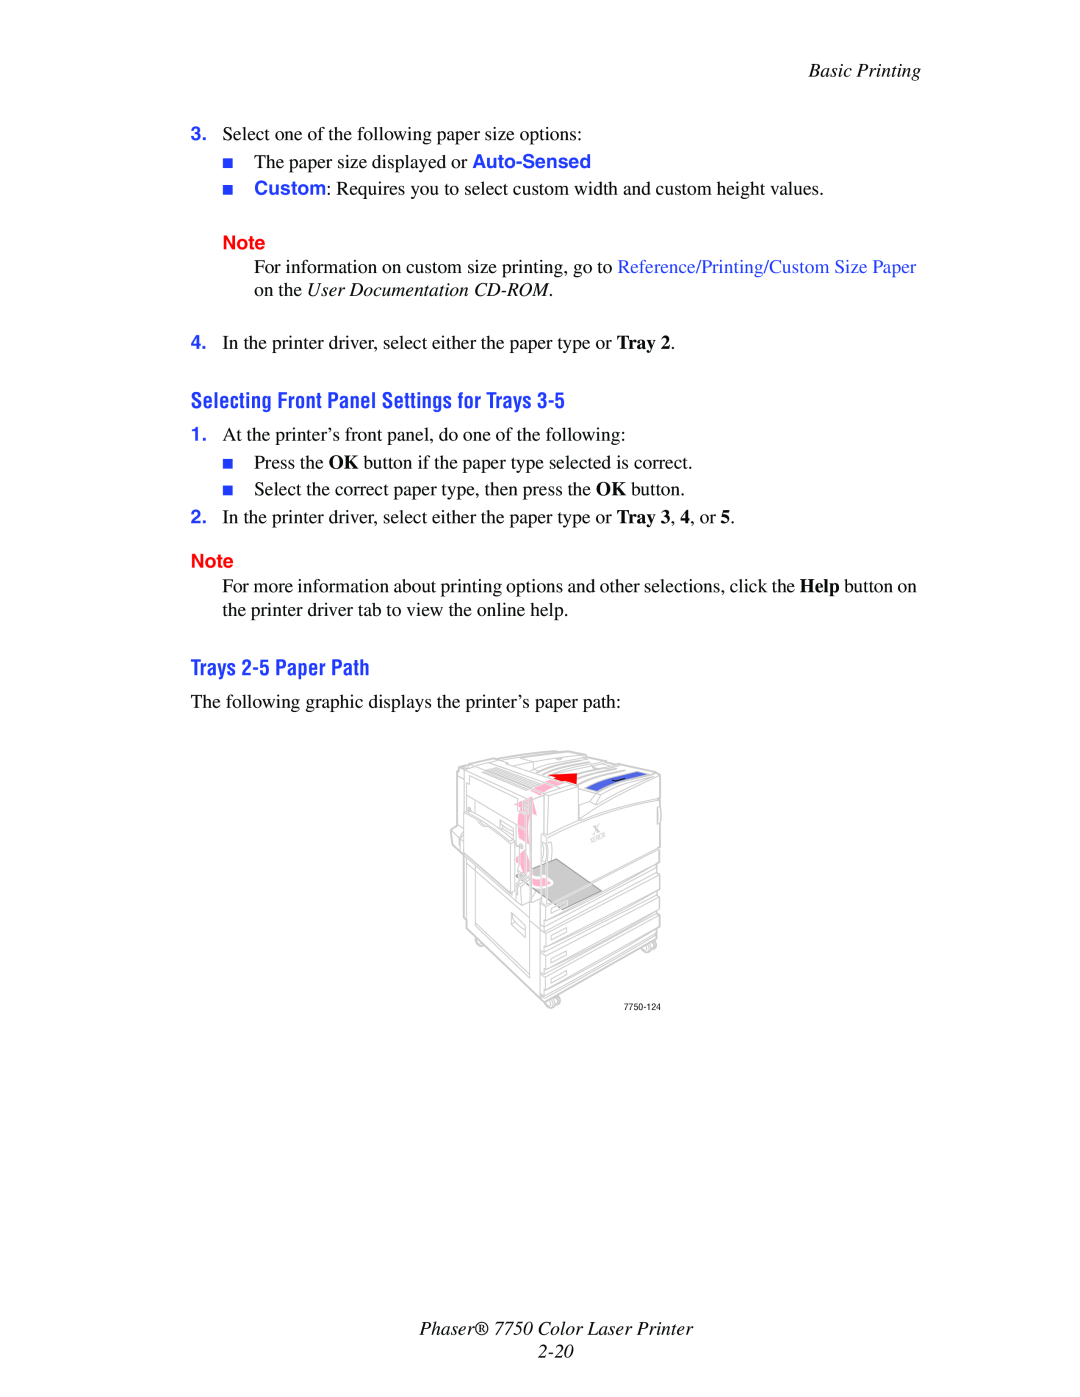 Xerox manual Selecting Front Panel Settings for Trays, Trays 2-5Paper Path, Phaser 7750 Color Laser Printer 2-20 